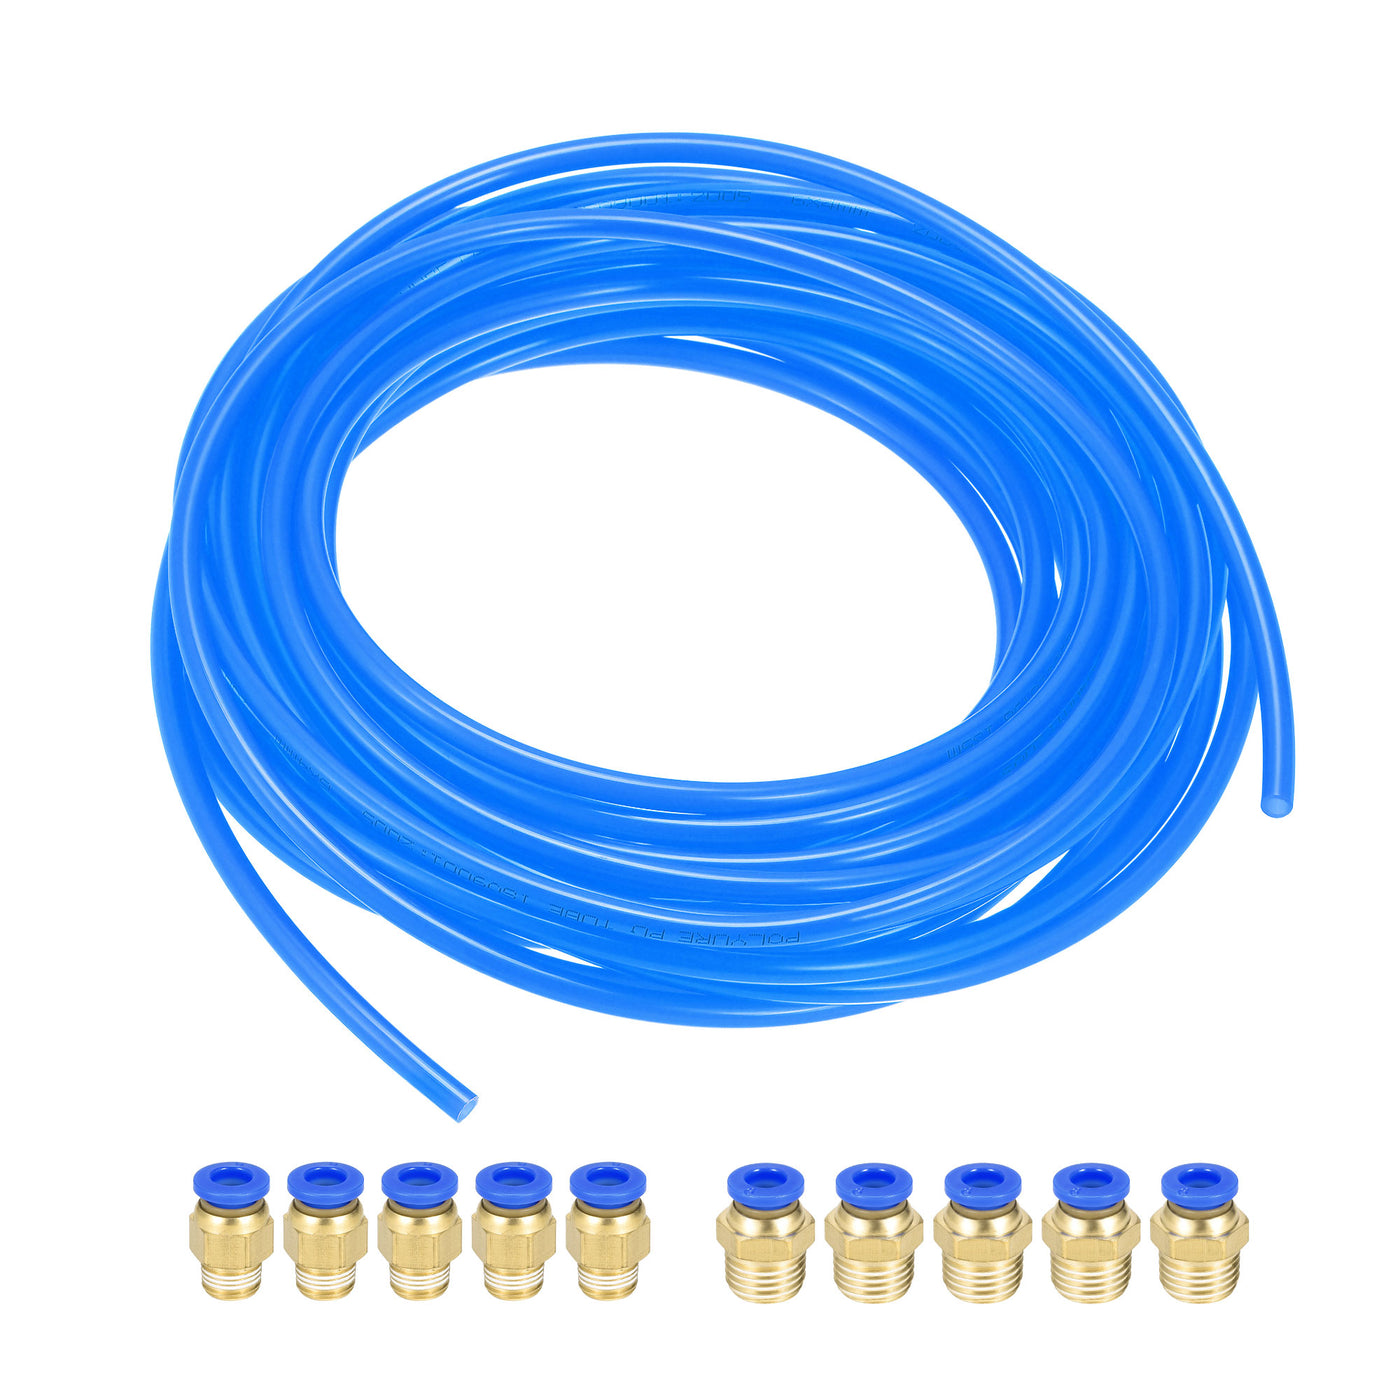 uxcell Uxcell Pneumatic Air Hose Tubing Air Compressor Tube 4mm/0.16''ID x 6mm/0.23''OD x 10m/32.8Ft Polyurethane Pipe Blue with 2 Type Connect Fittings